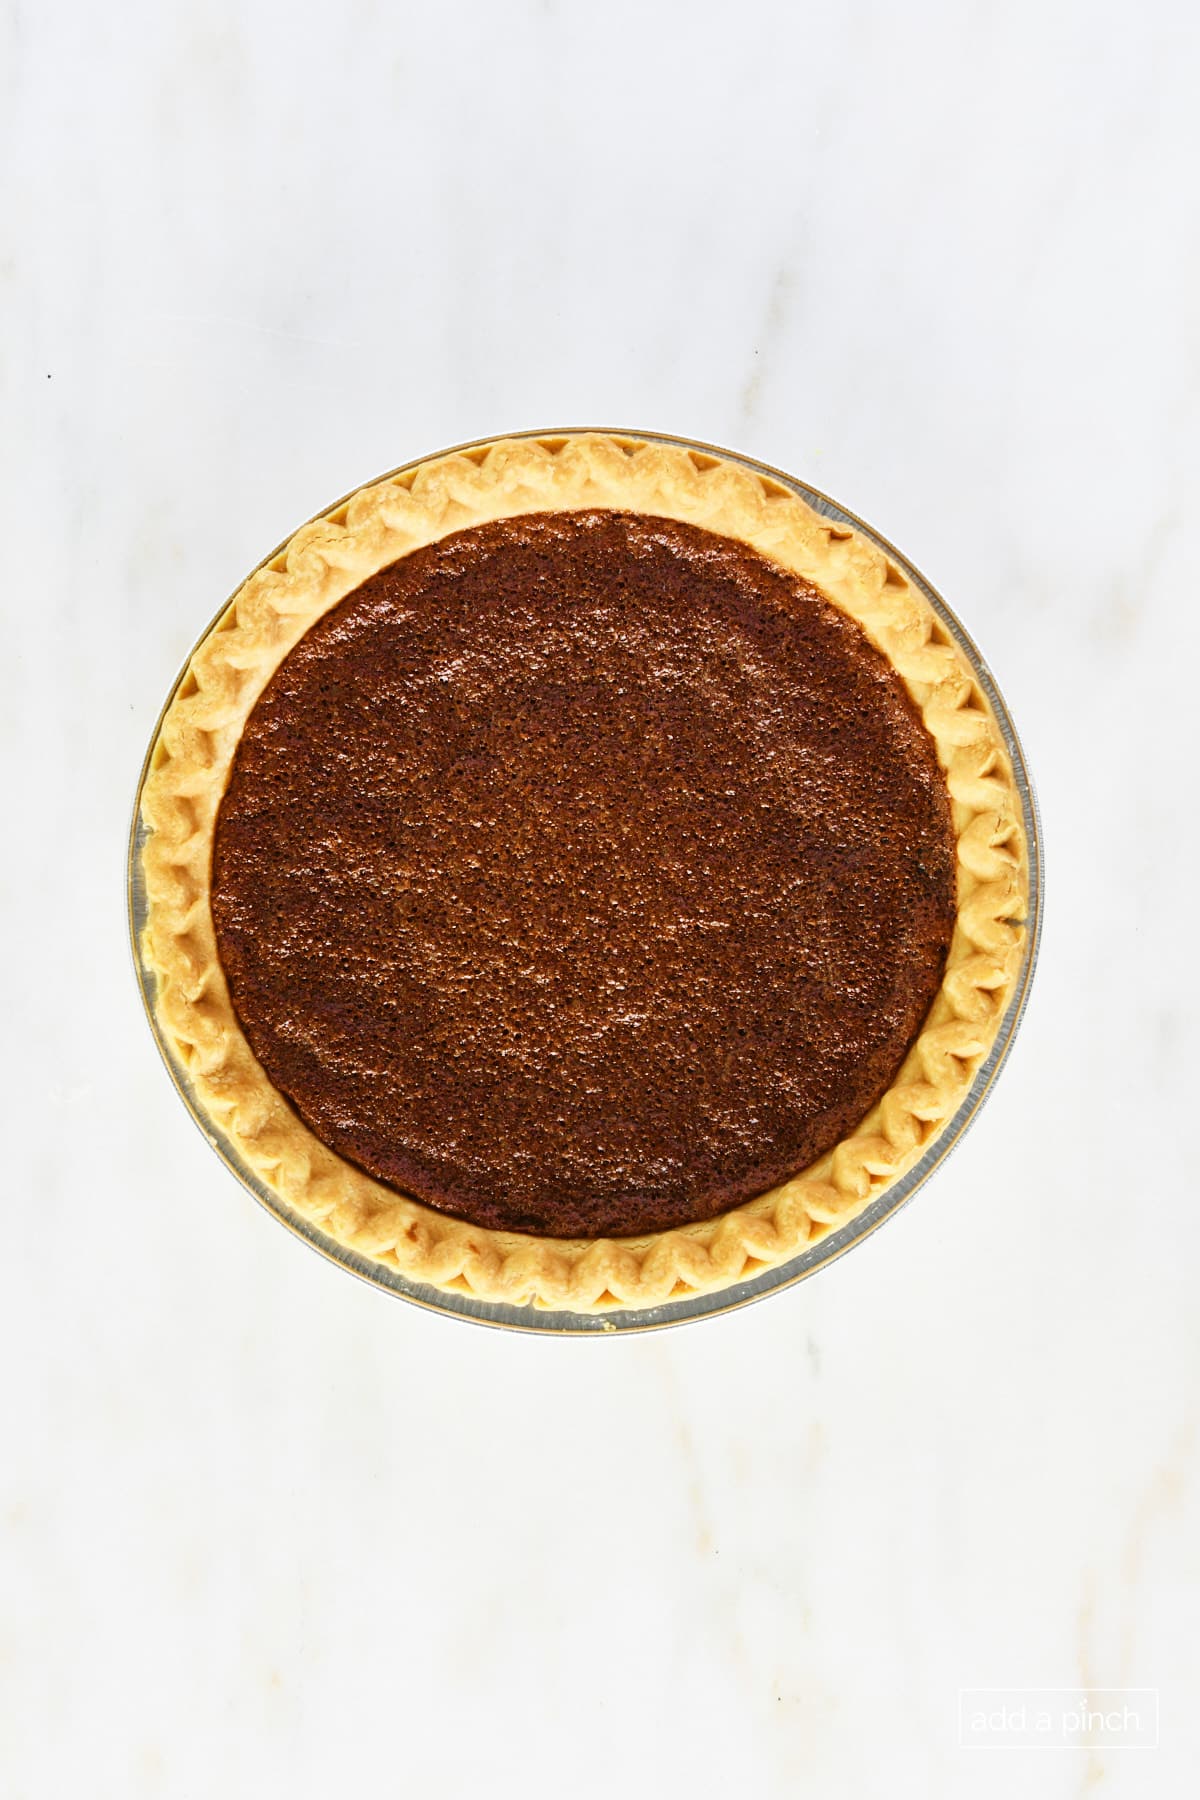 Baked chocolate chess pie on a marble surface.